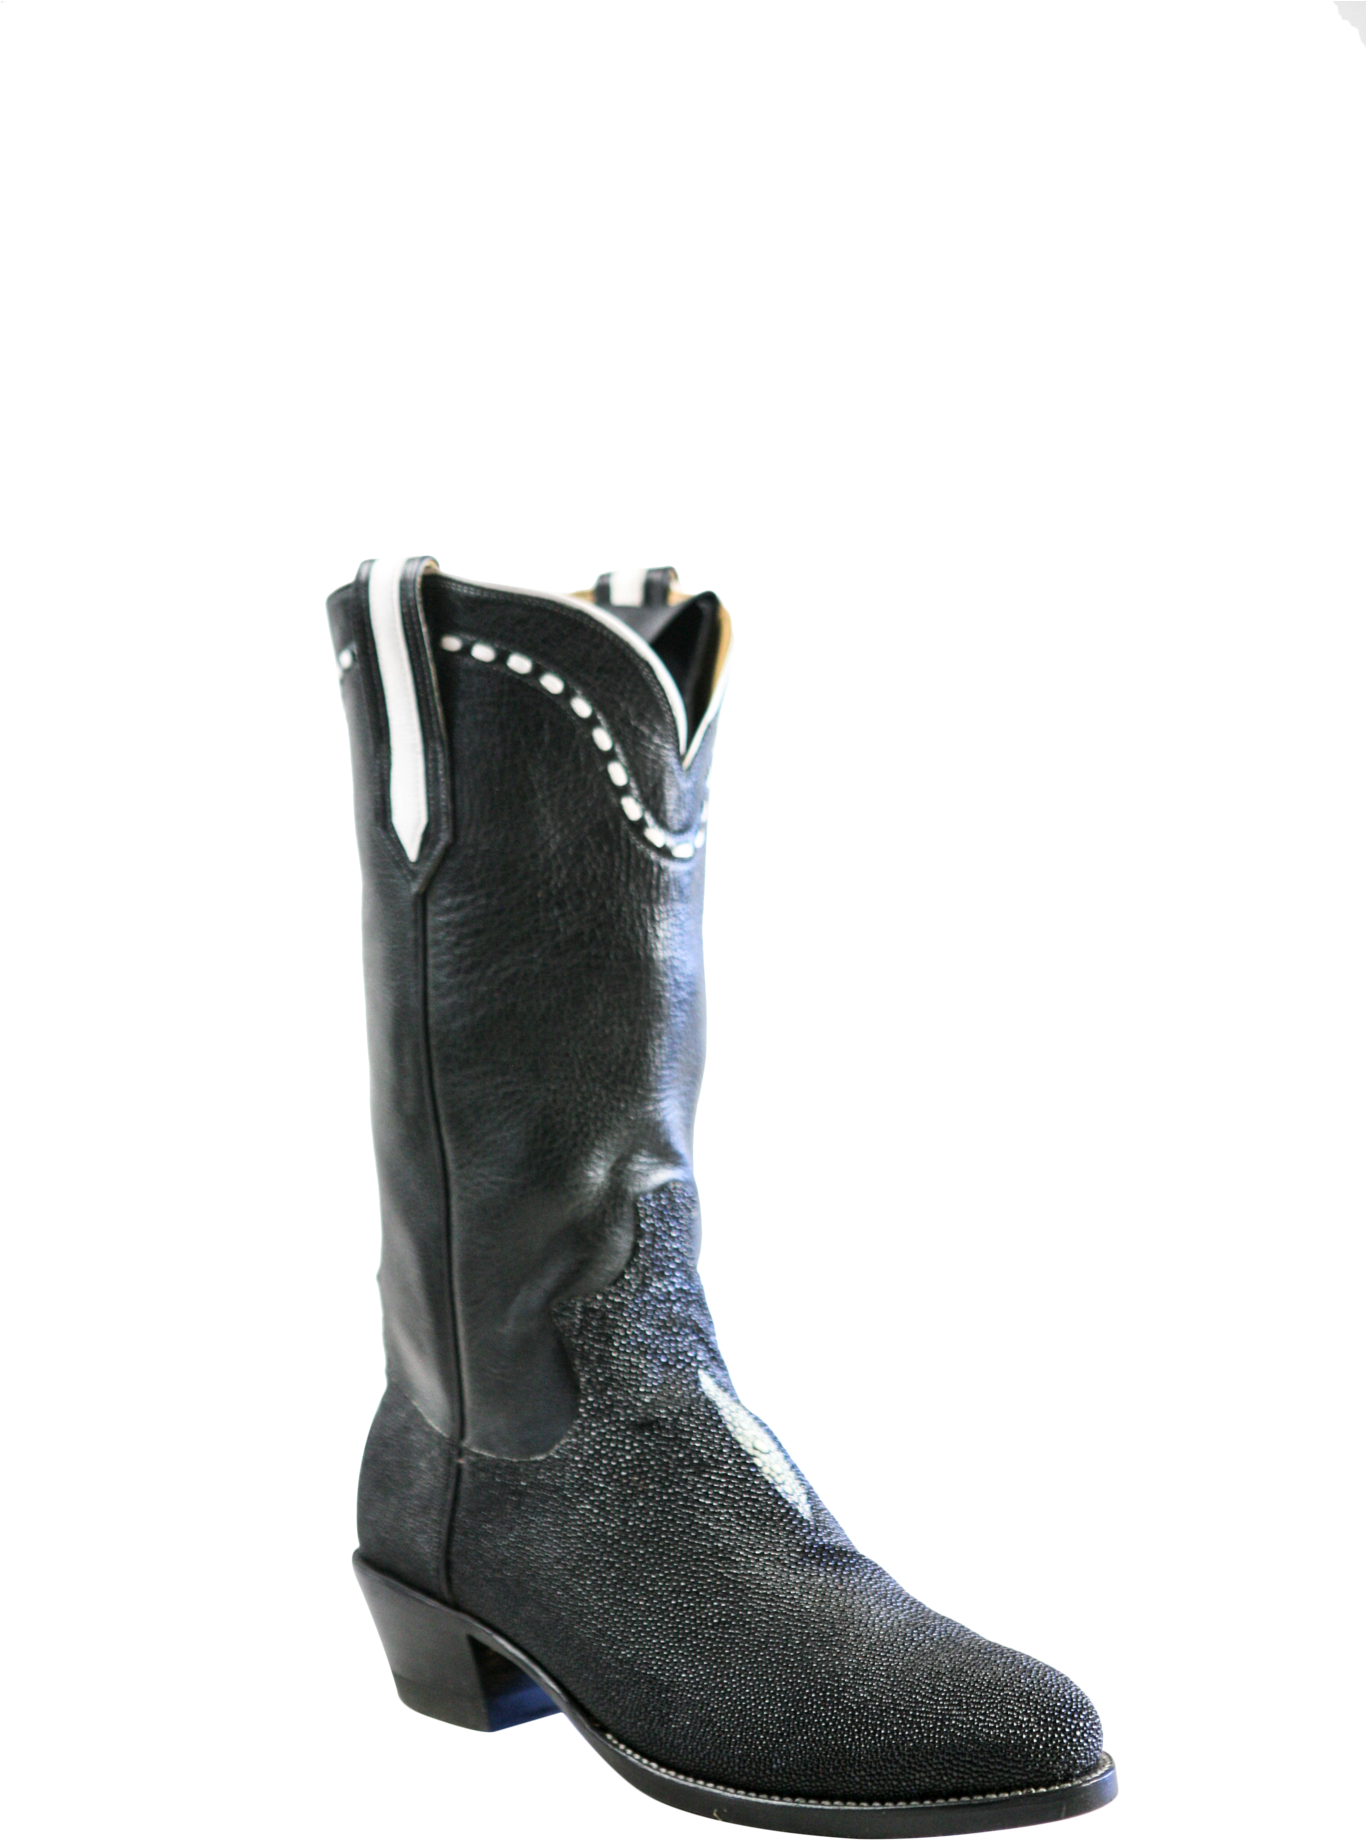 A Black Boot With White Stitching